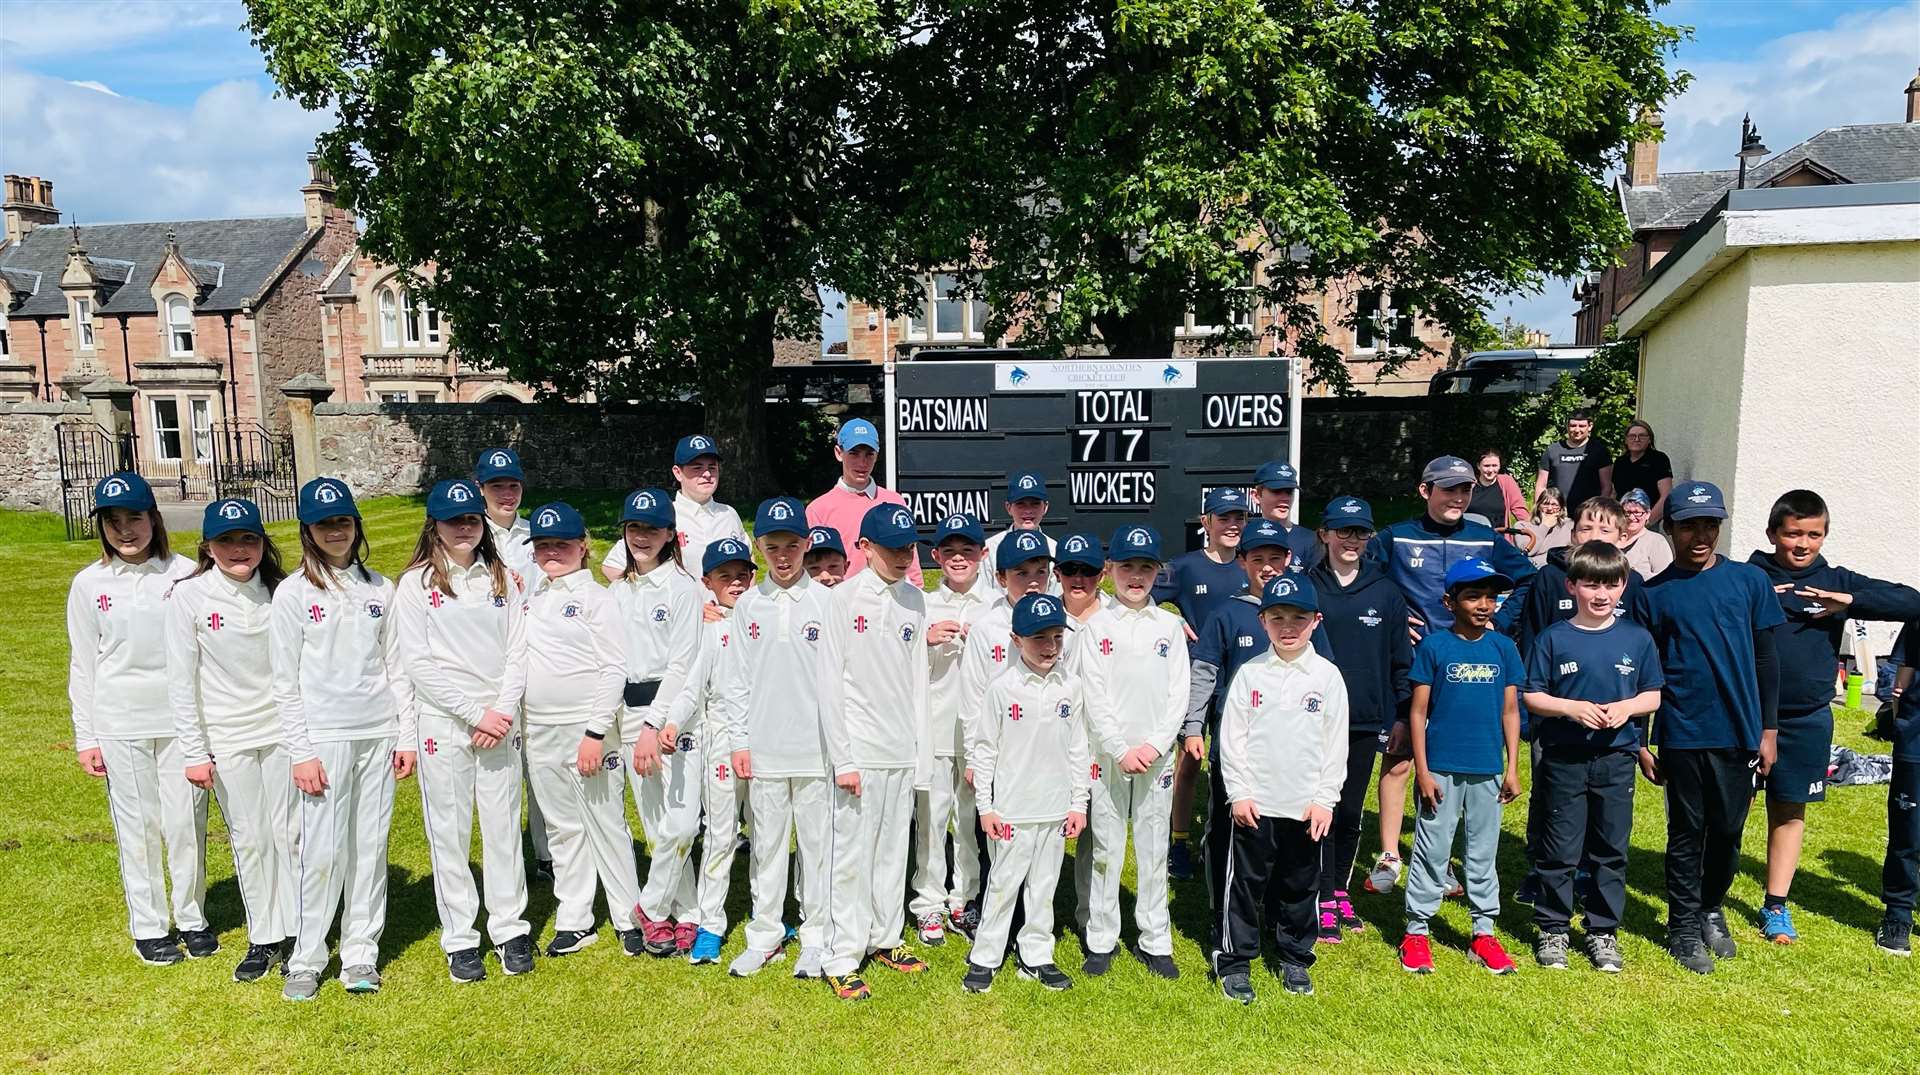 Youngsters aged between five and sixteen have been learning the sport of cricket with newly formed Dornoch Cricket Club.